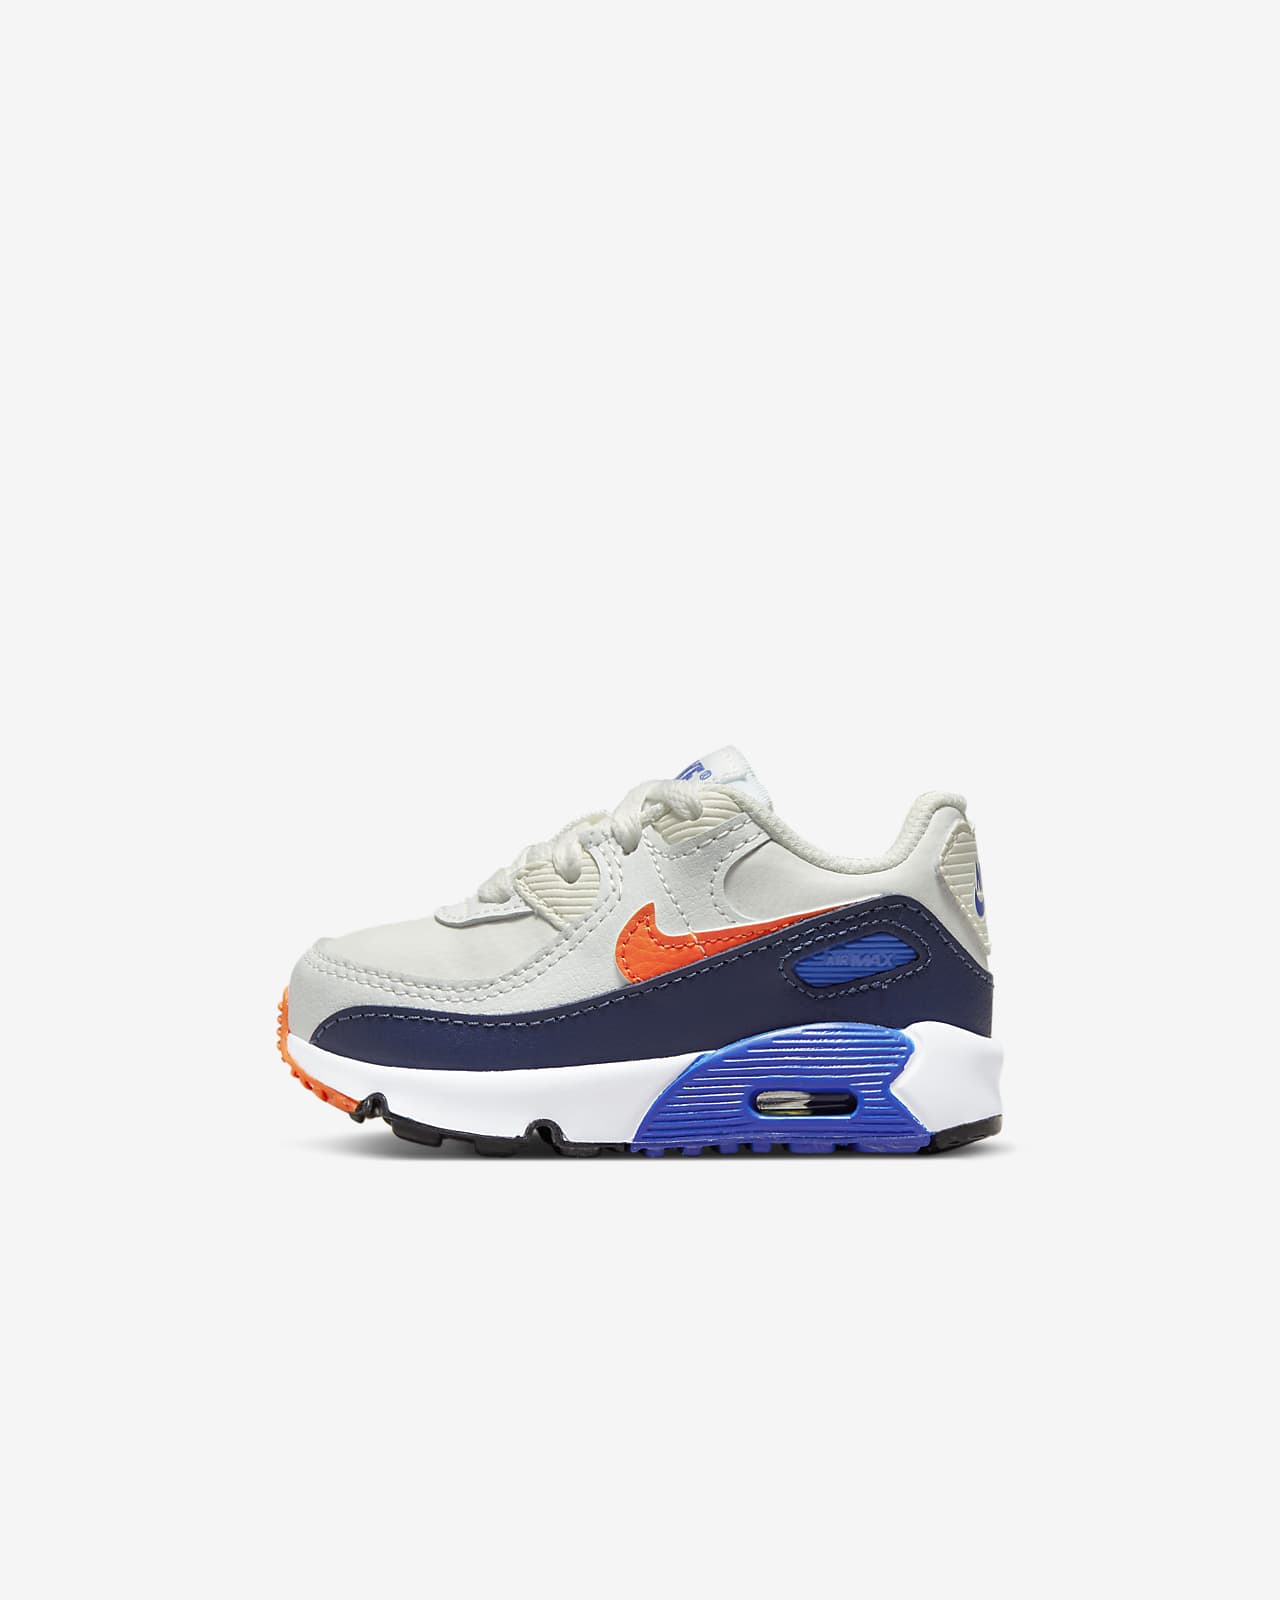 Nike Air Max 90 LTR Baby/Toddler Shoes